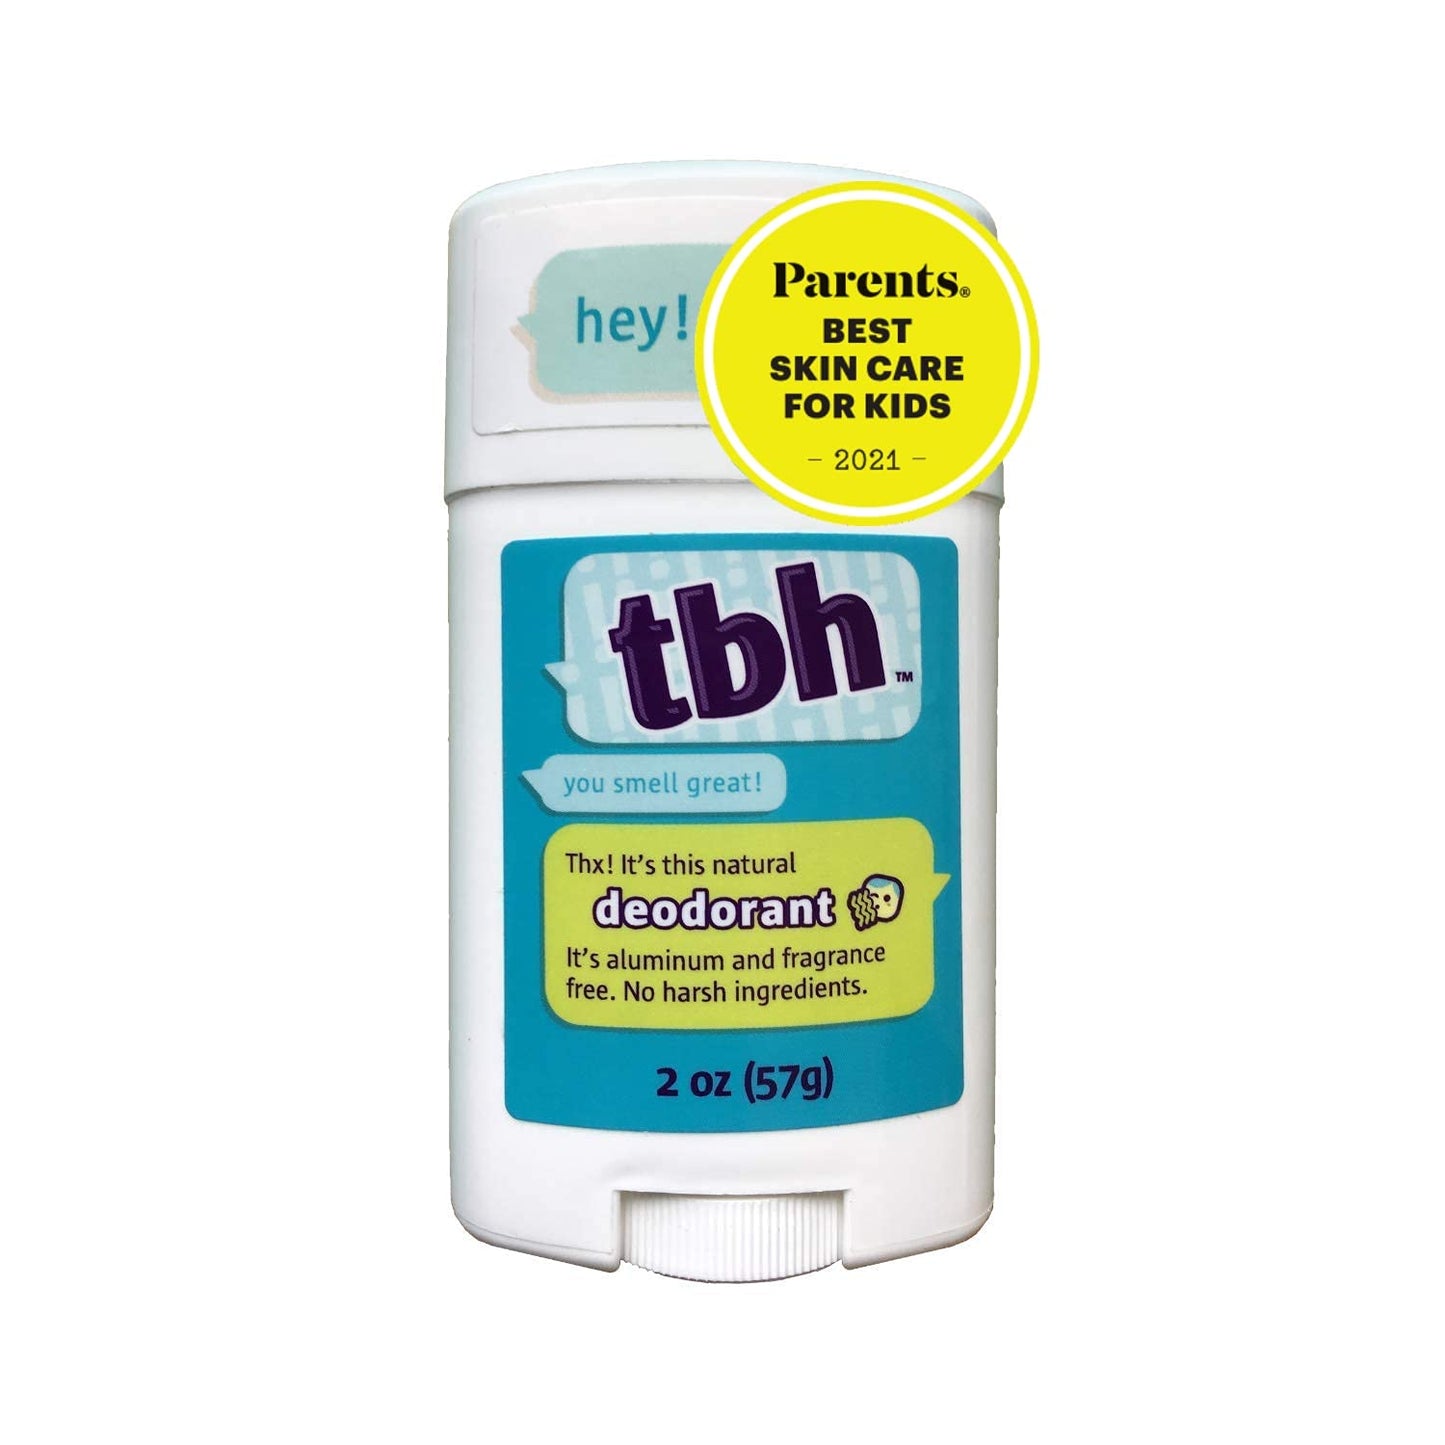 TBH Kids Deodorant - Unscented Deodorant for Kids - Girls and Boys, 57 g